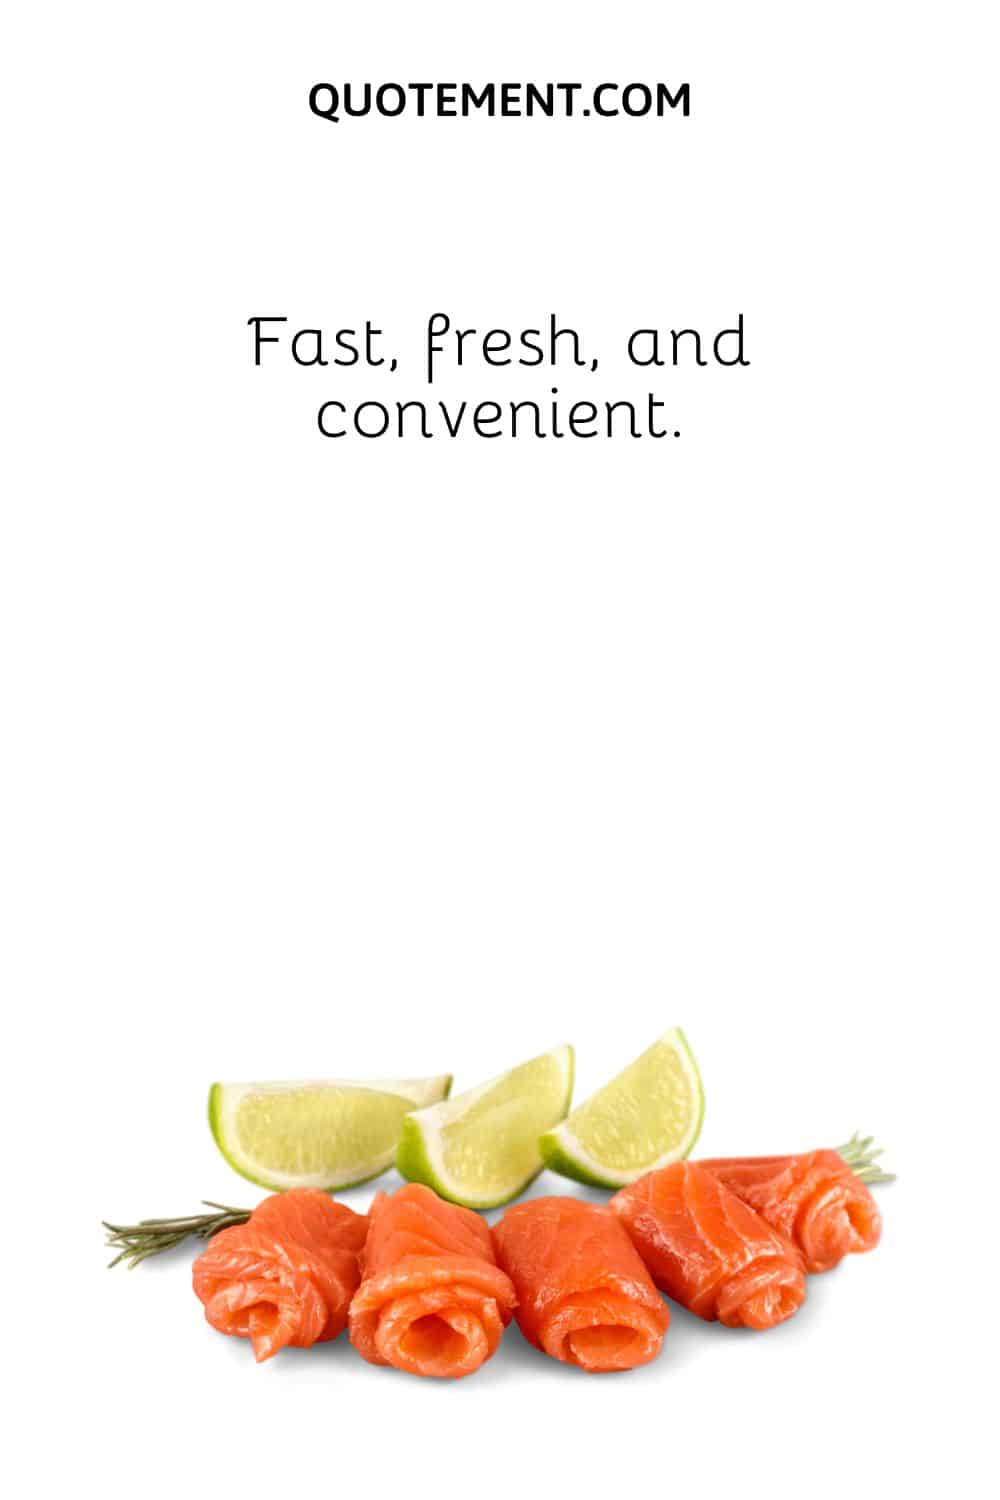 Fast, fresh, and convenient.